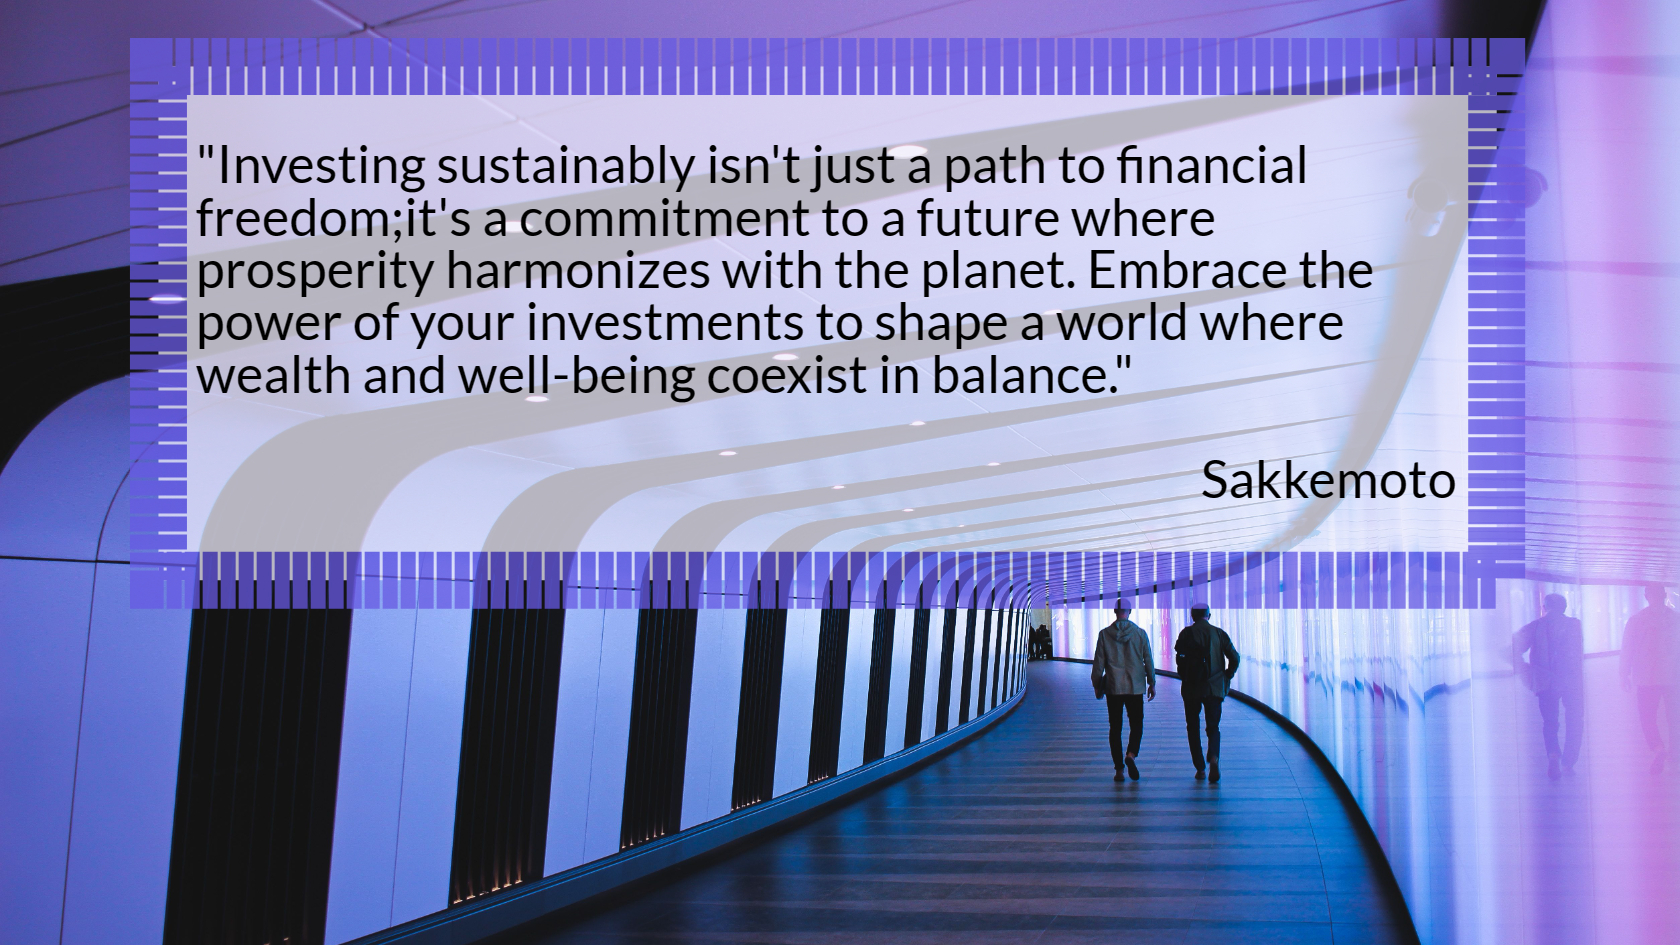 Investing sustainably isn't just a path to financial freedom;